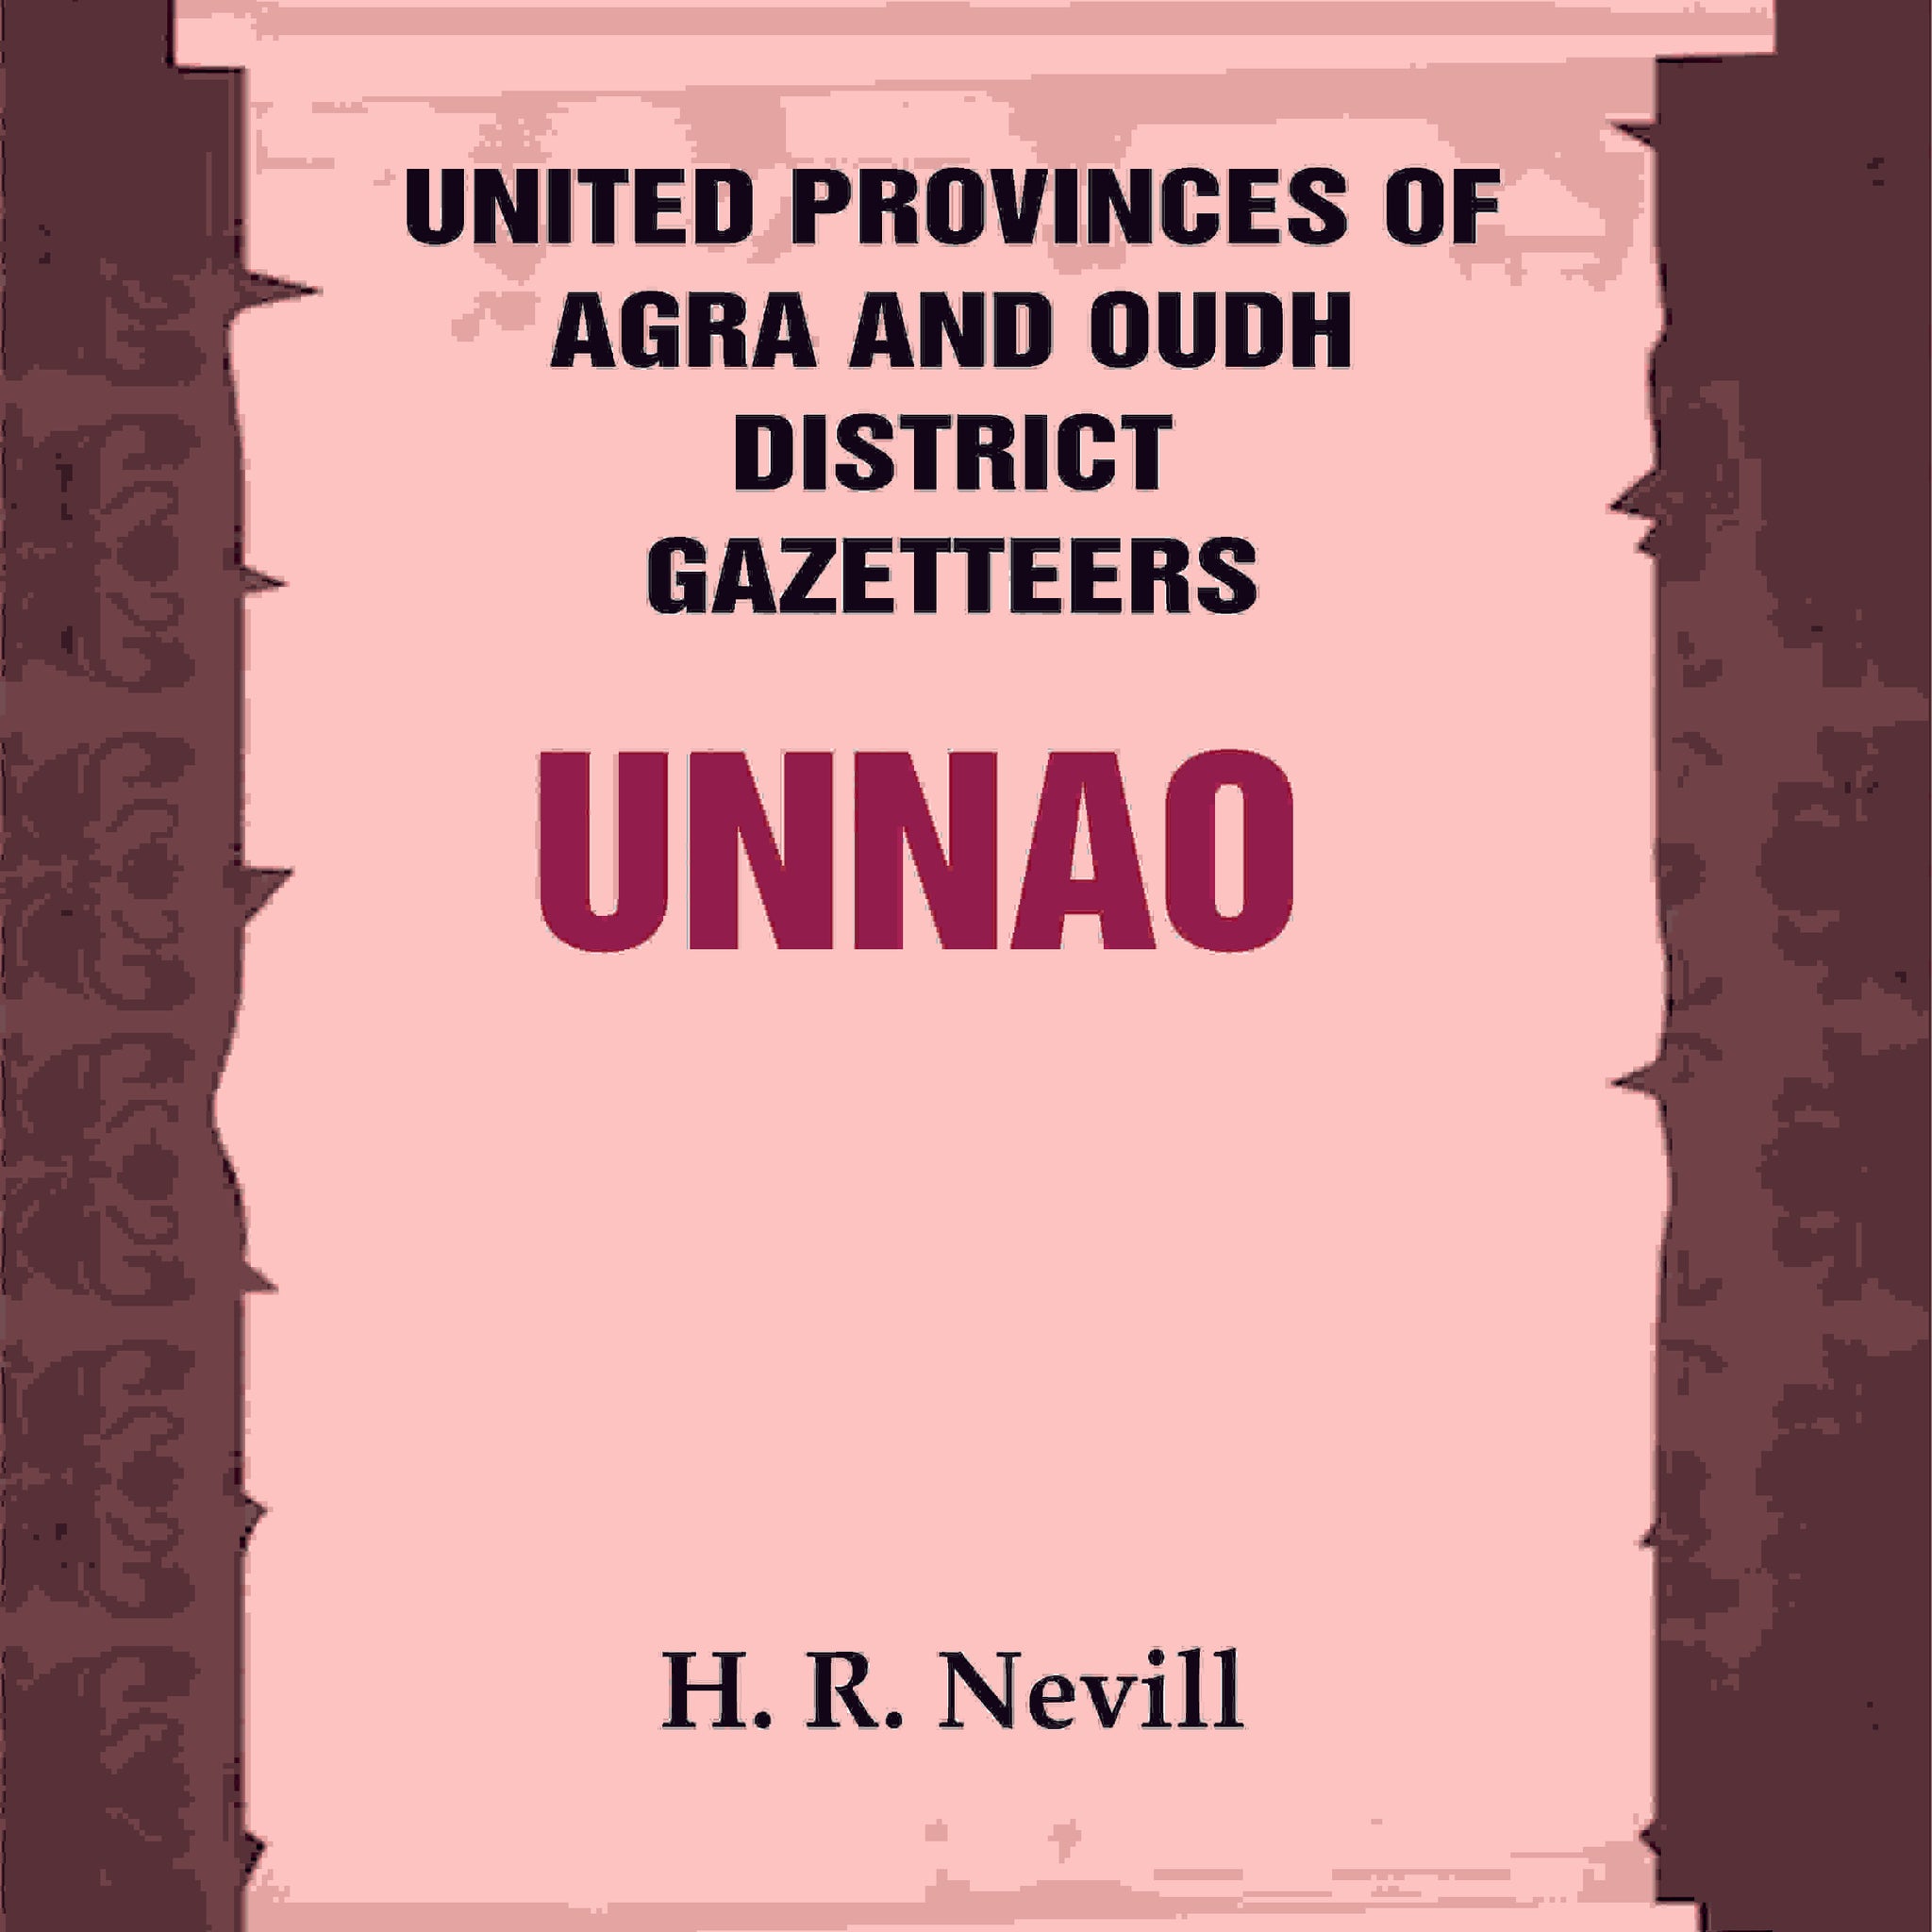 United Provinces of Agra and Oudh District Gazetteers: Unnao